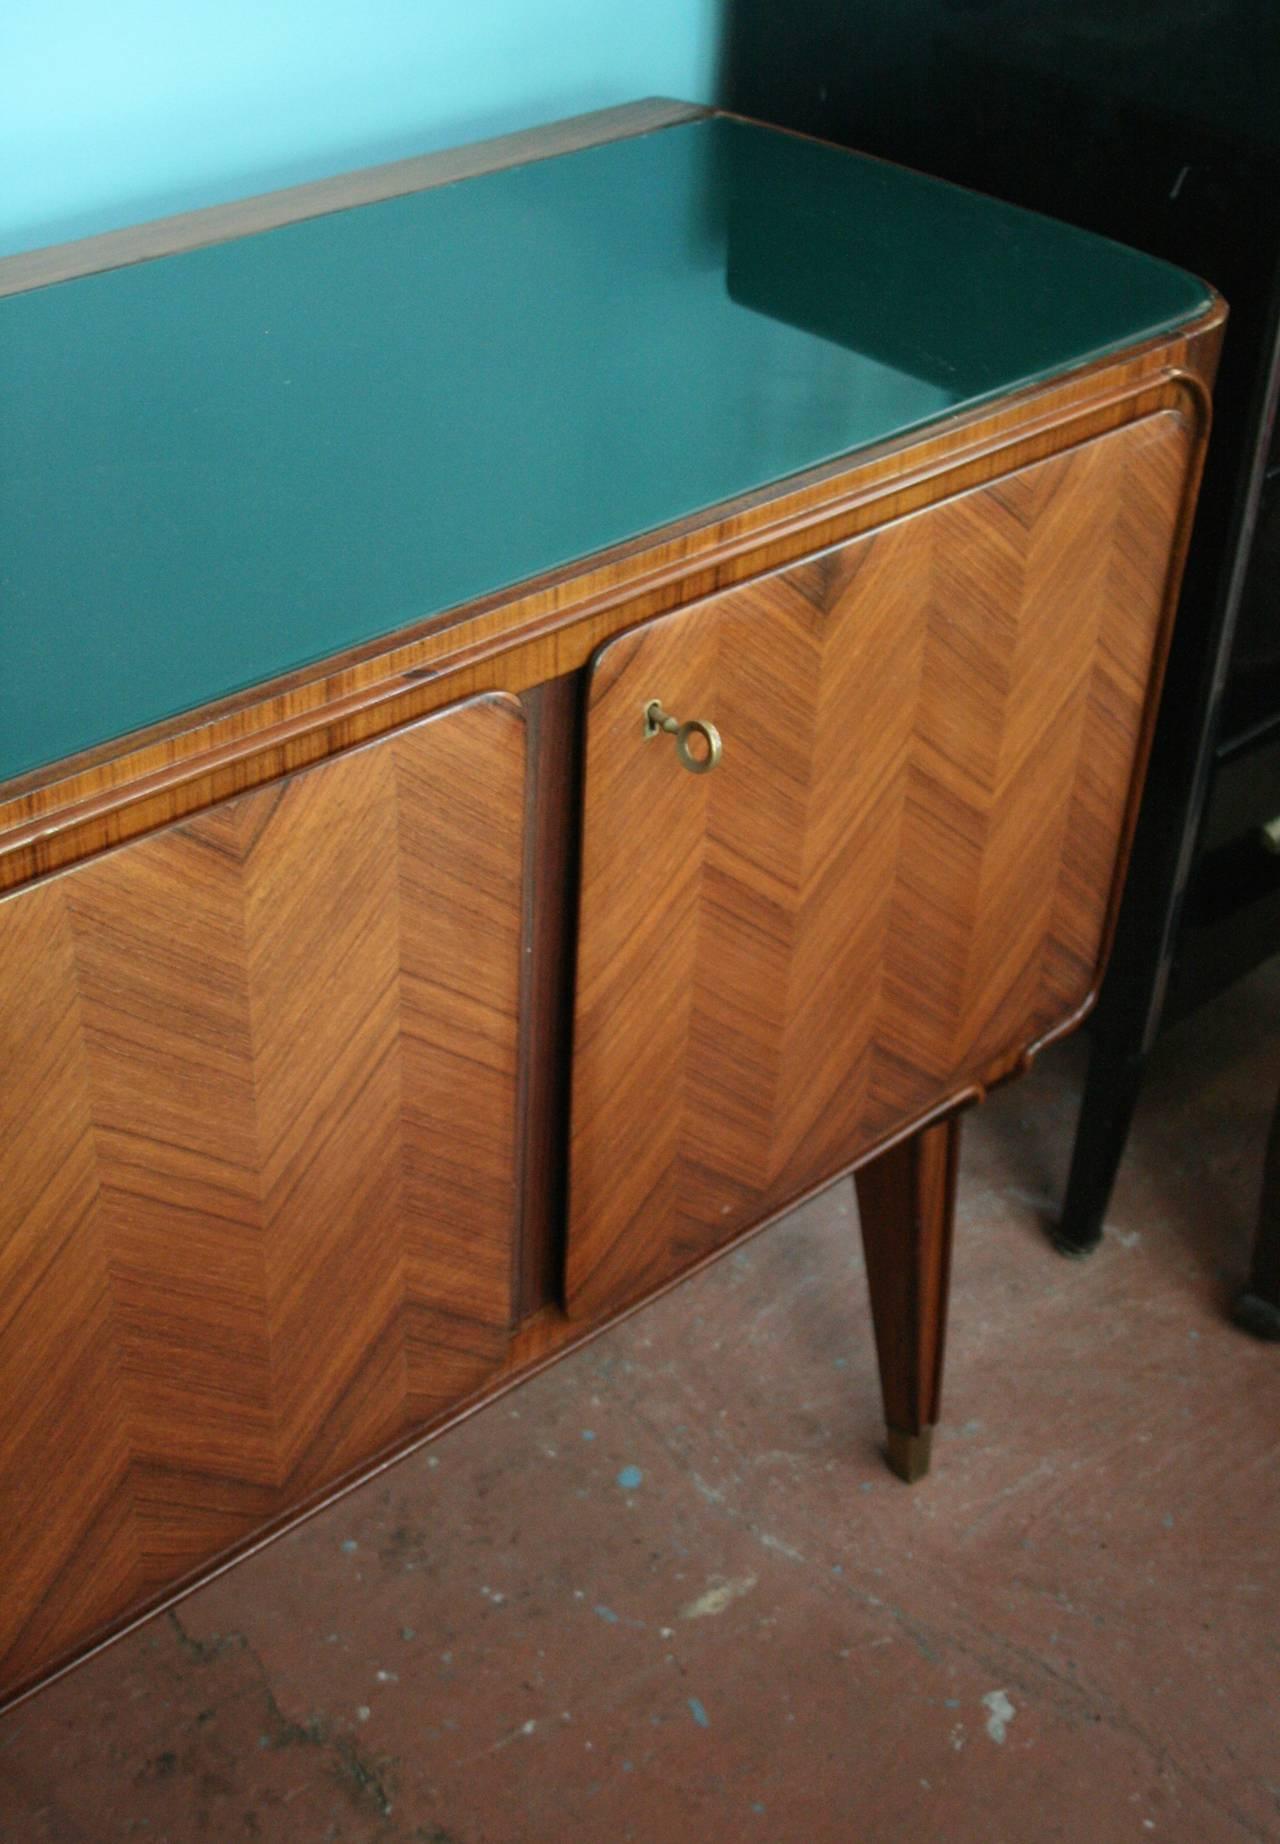 Beautiful rosewood sideboard by Dassi featuring five doors with inlaid herringbone pattern; central section features silver drawers; retains all original brass hardware on legs, pulls, locks and working key for all doors.

Avantgarden Ltd.